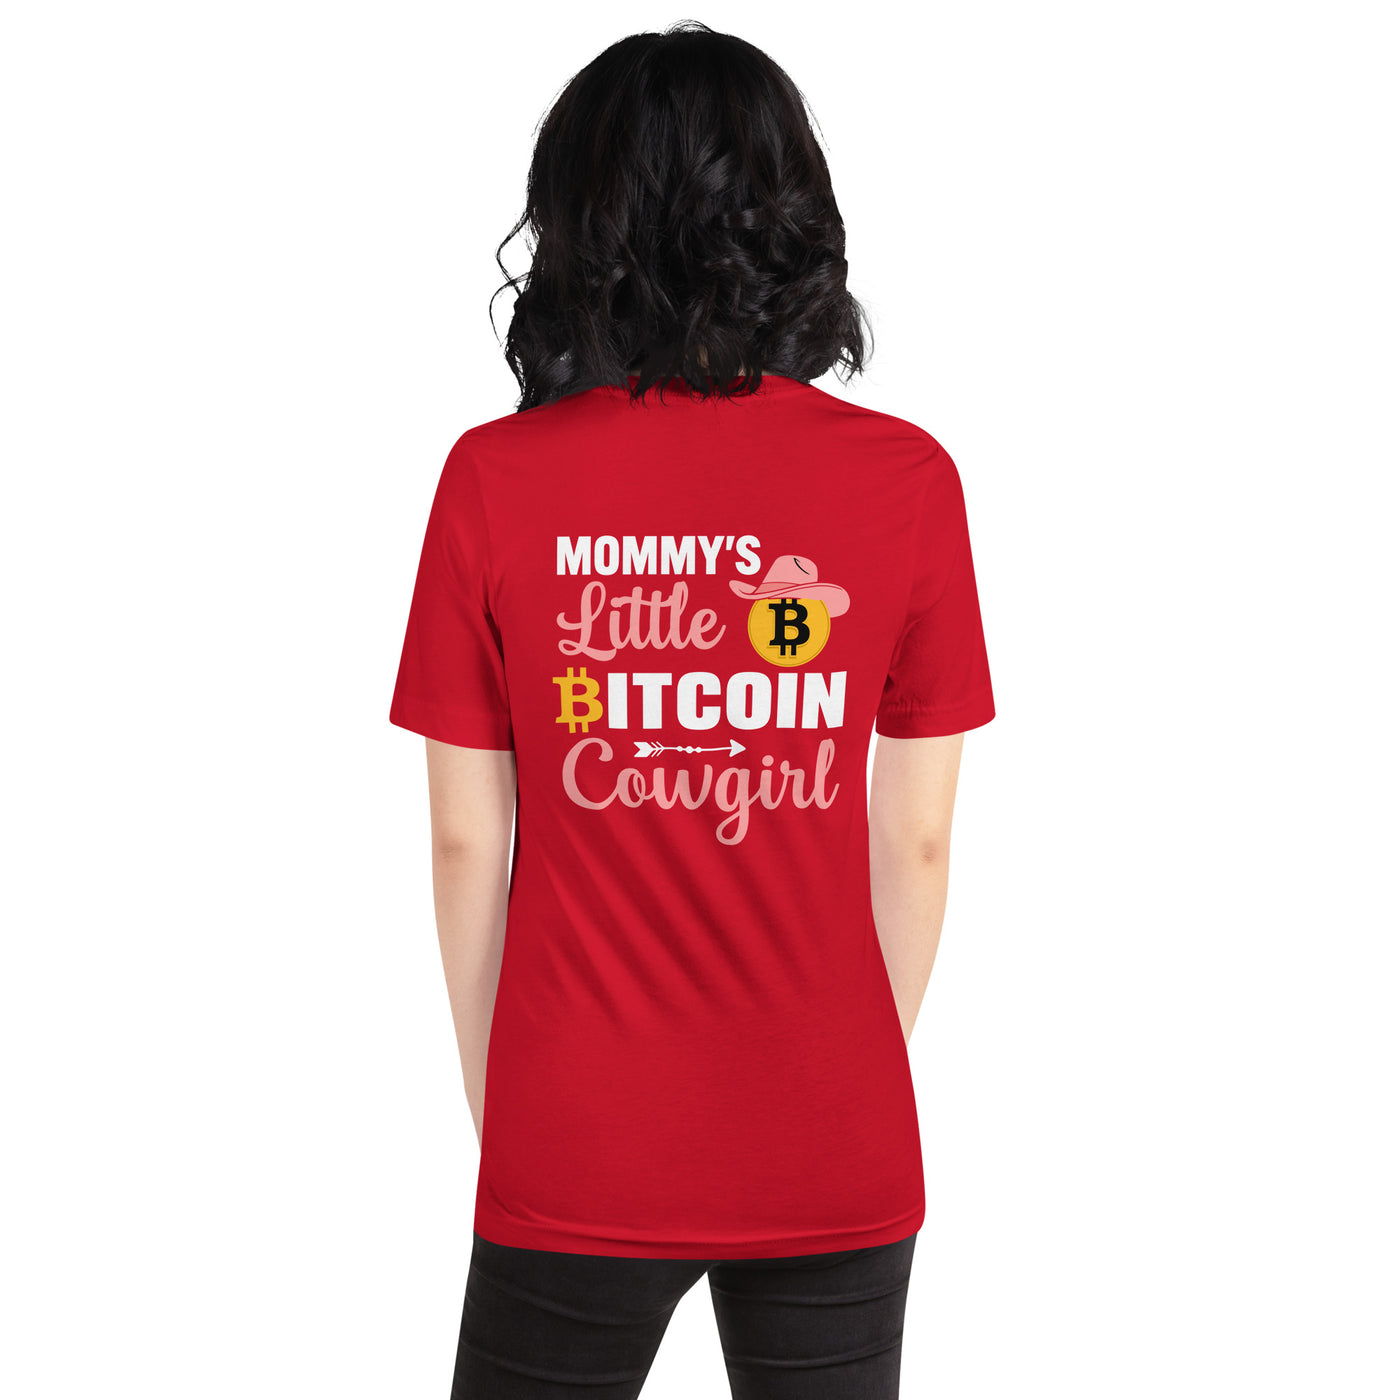 Mommy's Little Bitcoin Cowgirl - Unisex t-shirt